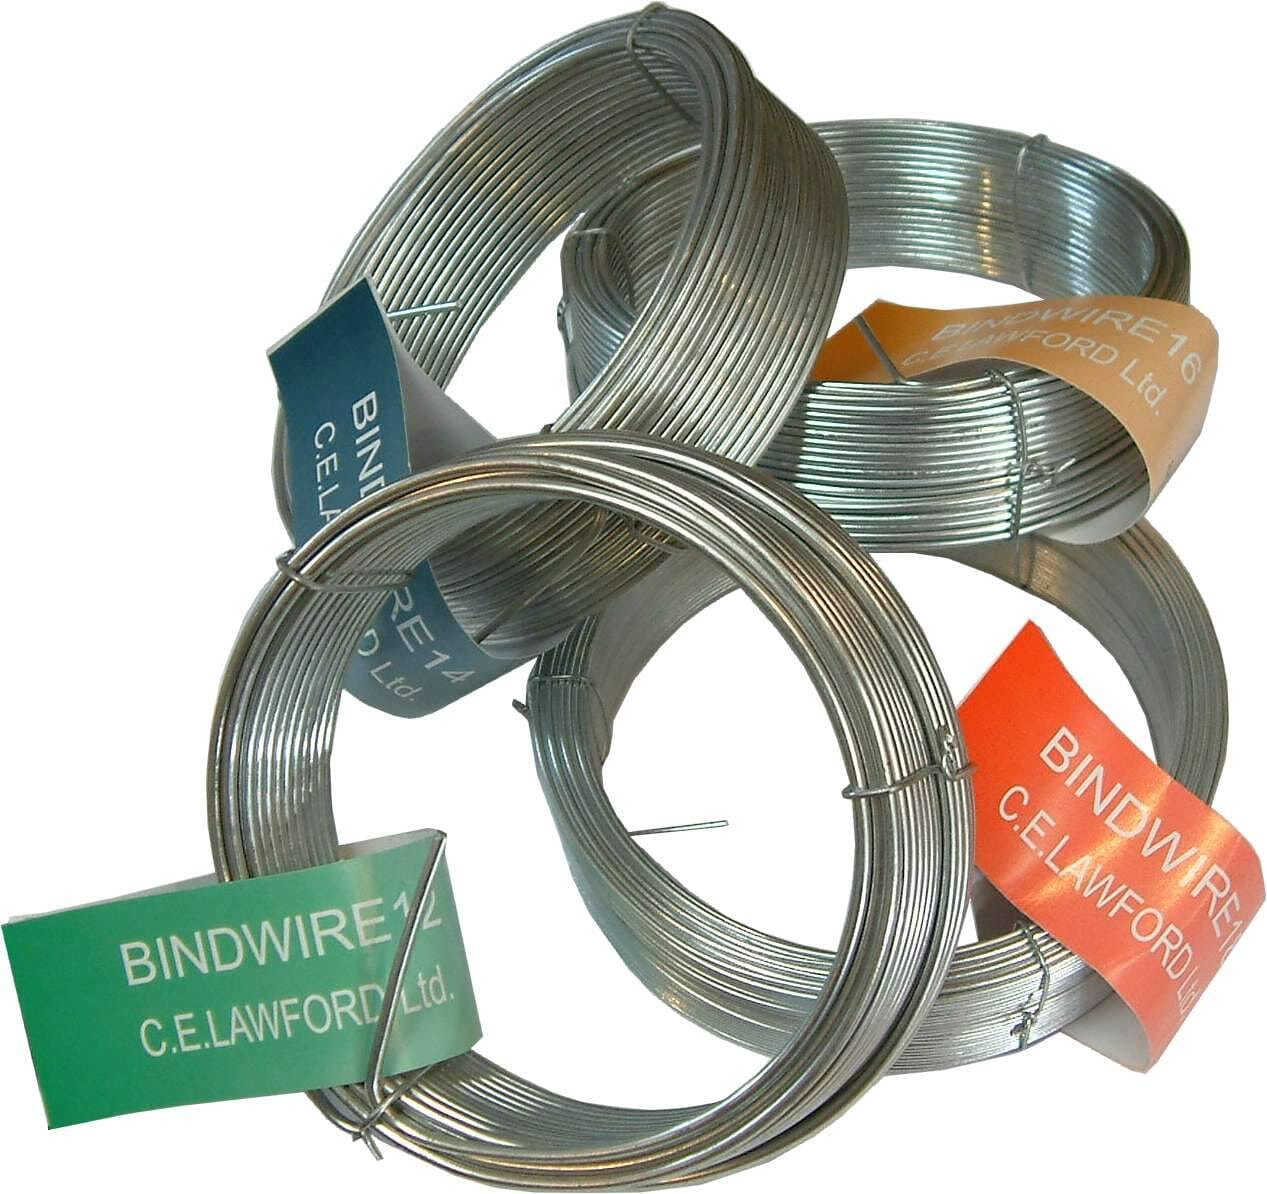 Xcel Binding Wire - Galvanised 500gm (56m) 1.25mm Red 18g